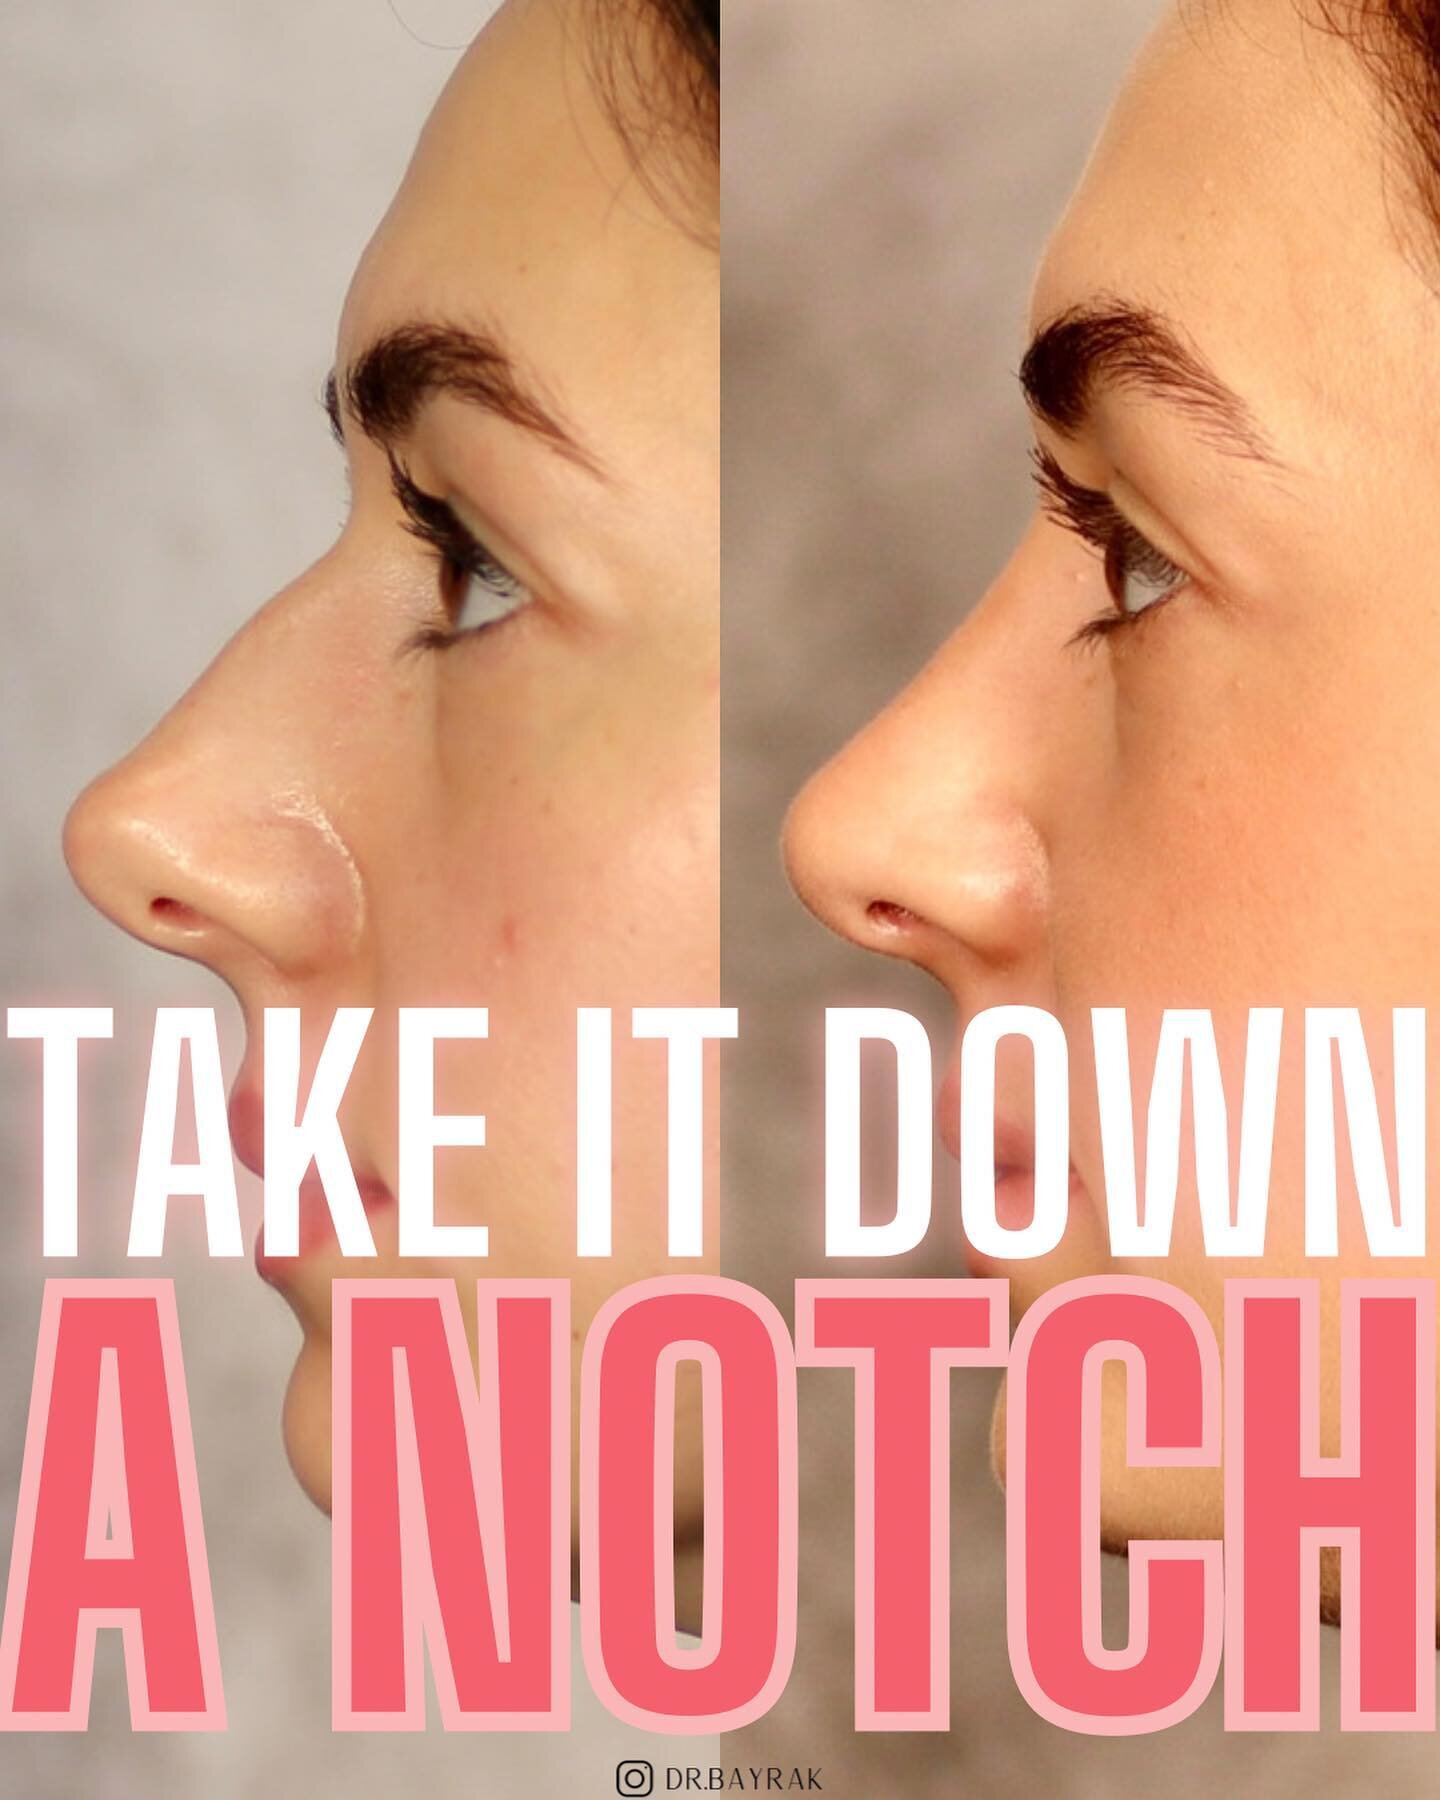 Hump got you down? 👃🏼 Via a surgical rhinoplasty, elements of the nasal structure (in this case, a dorsal hump) can be addressed to create a more refined, feminine appearance to the nose. The goal is a result that is elegant, natural, and complemen